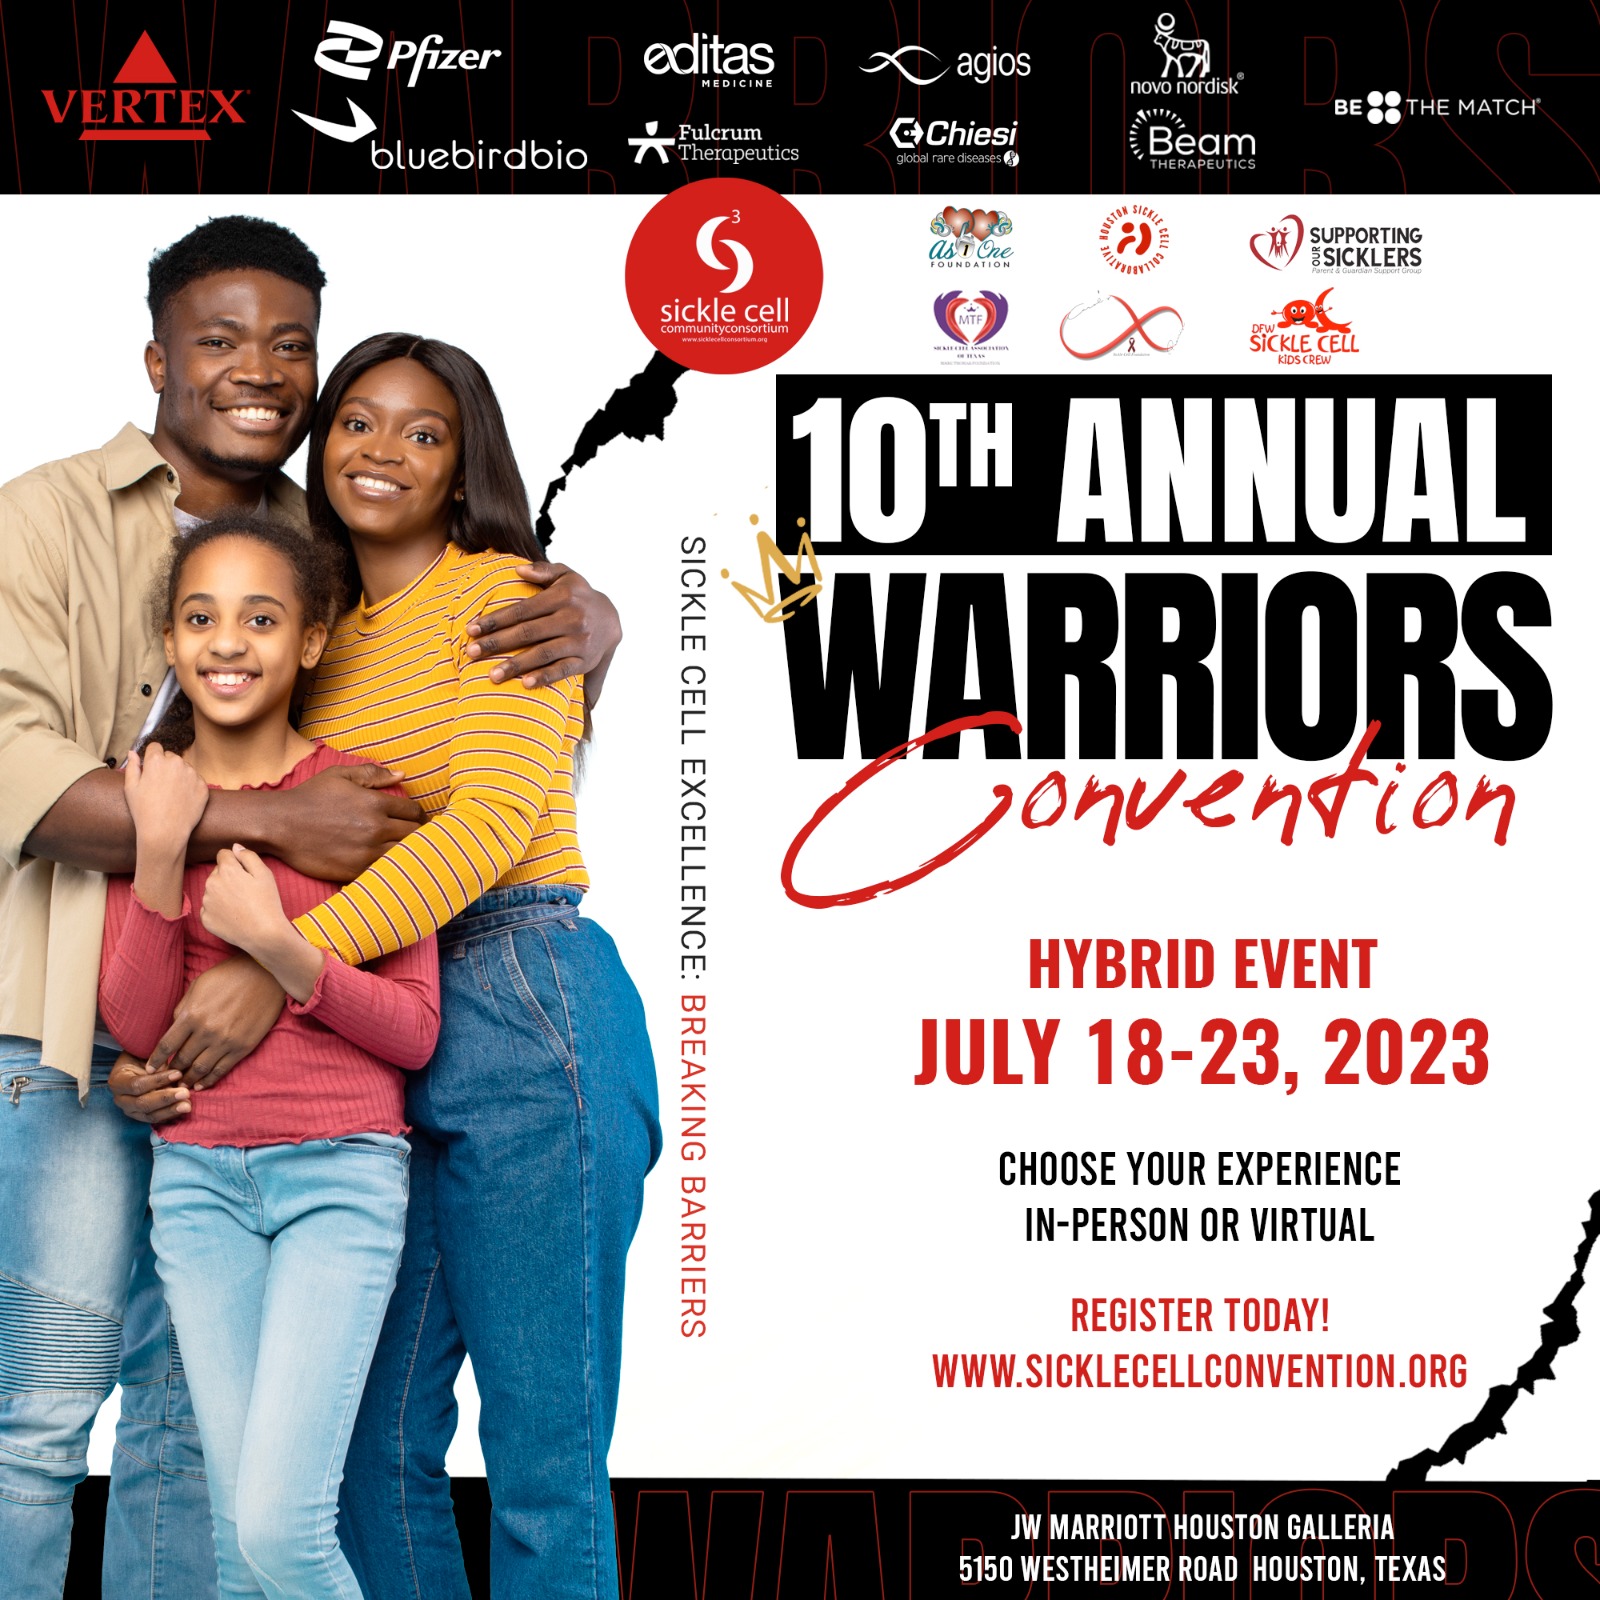 Executive Director of ‘Sickle Cell Warriors Convention’ speaks on